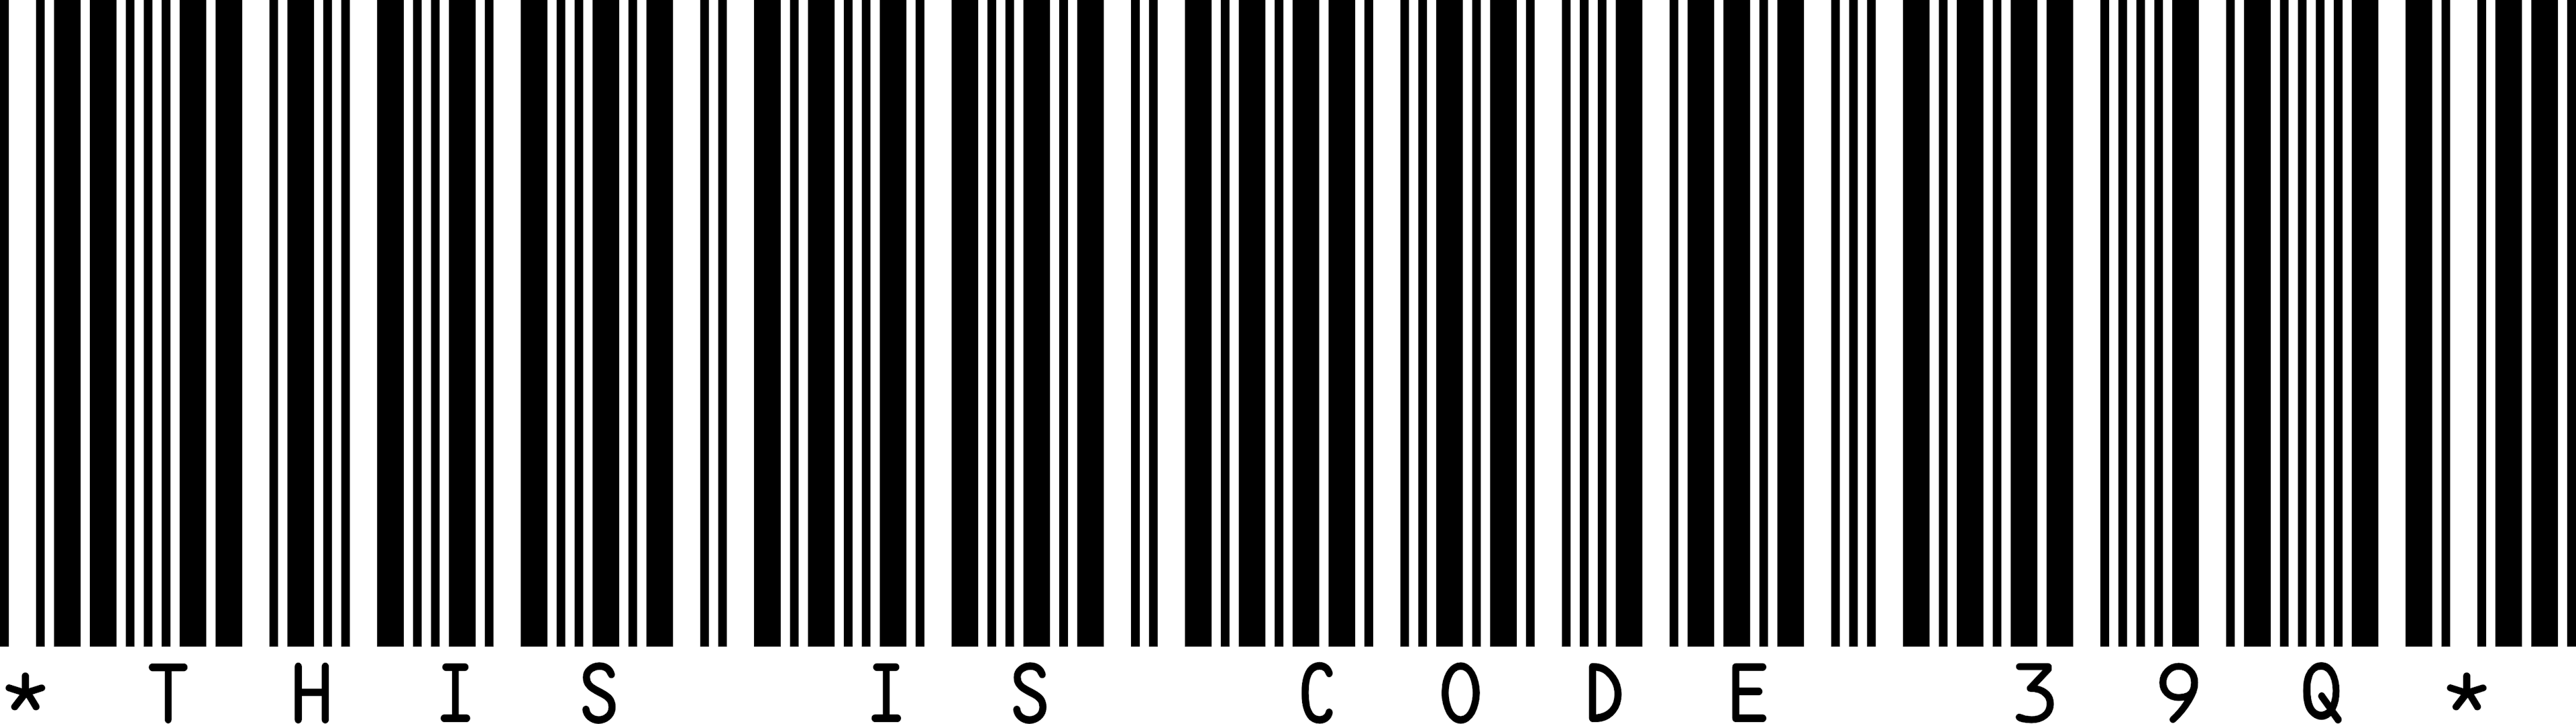 Example of Code39 Barcode